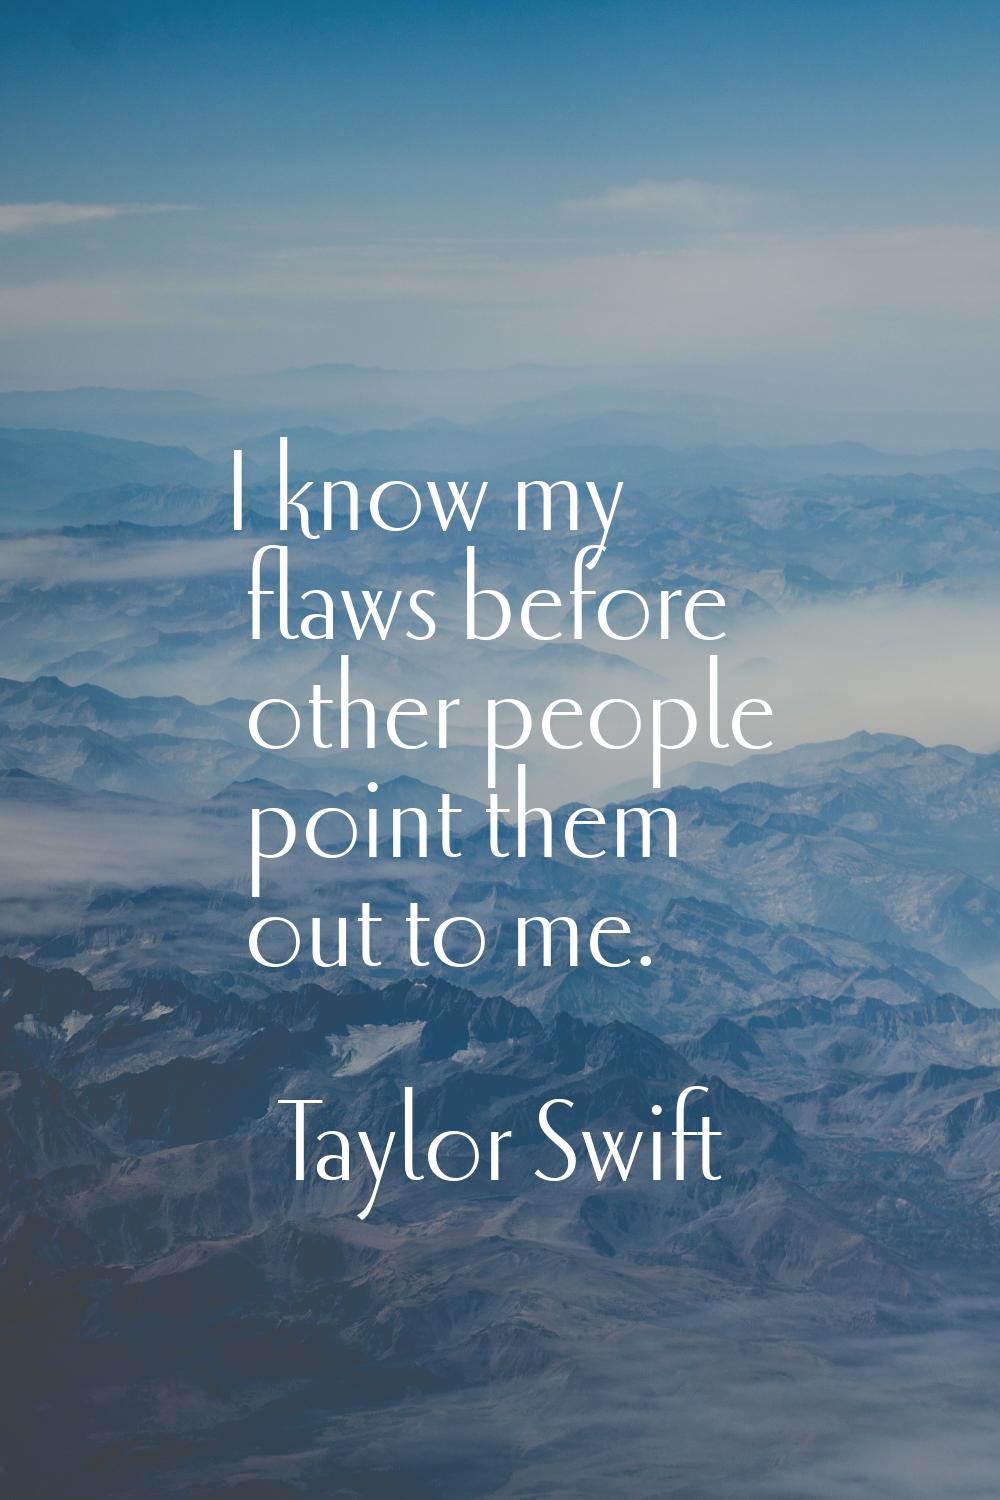 I know my flaws before other people point them out to me.